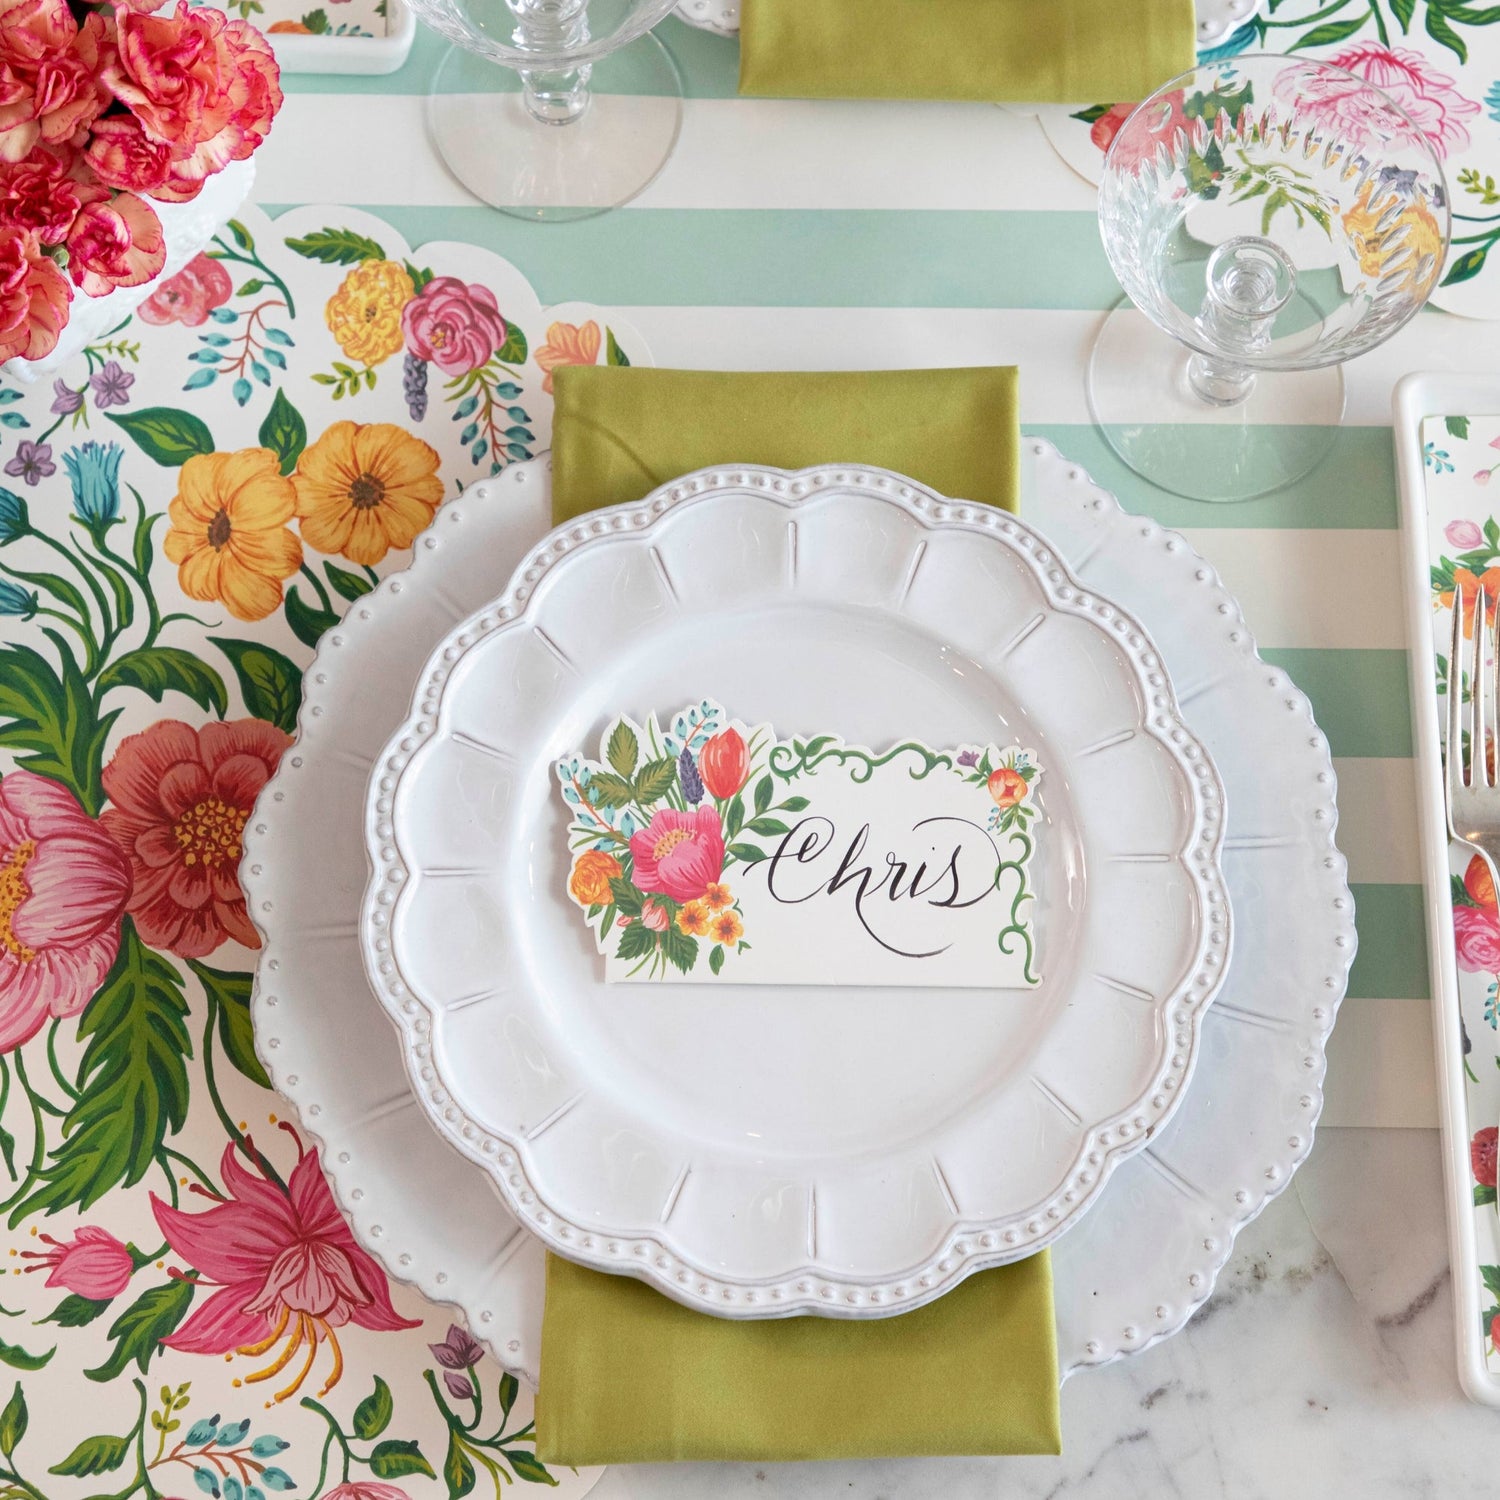 A colorful floral pattern on Hester &amp; Cook Die-cut Sweet Garden Posey Placemats.